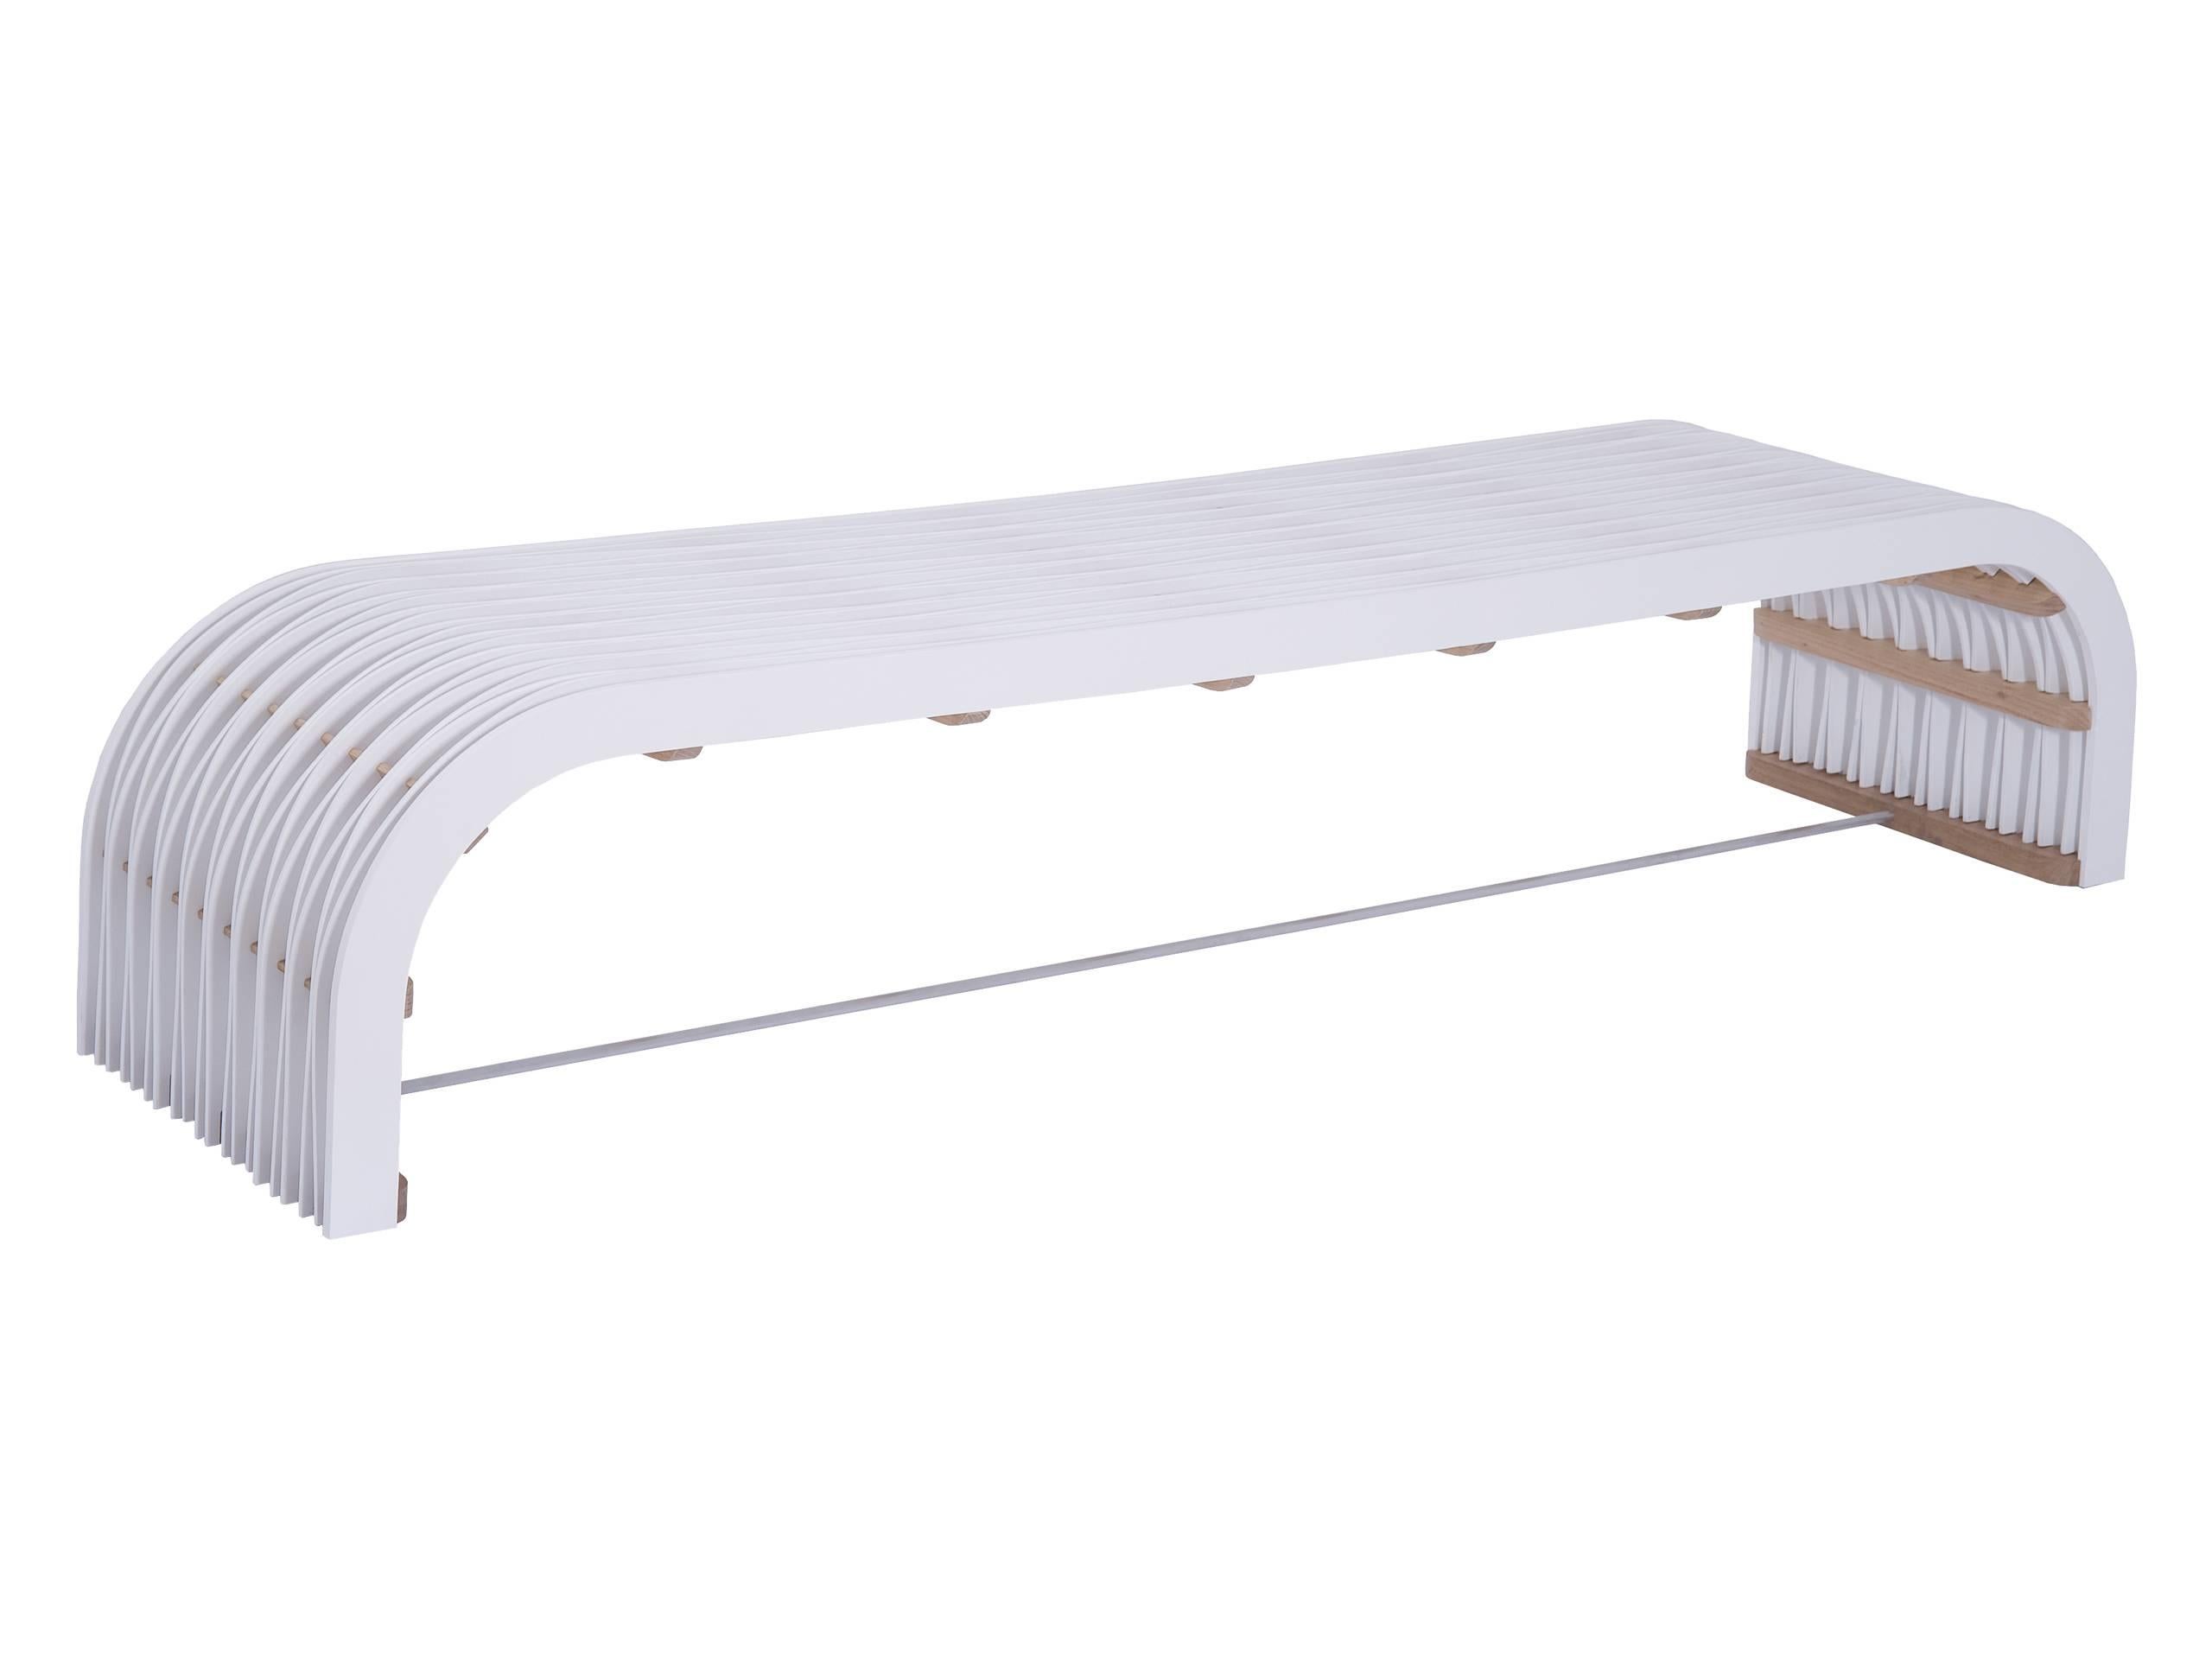 Colméia Brazilian Contemporary Bended Wood Bench by Lattoog 1